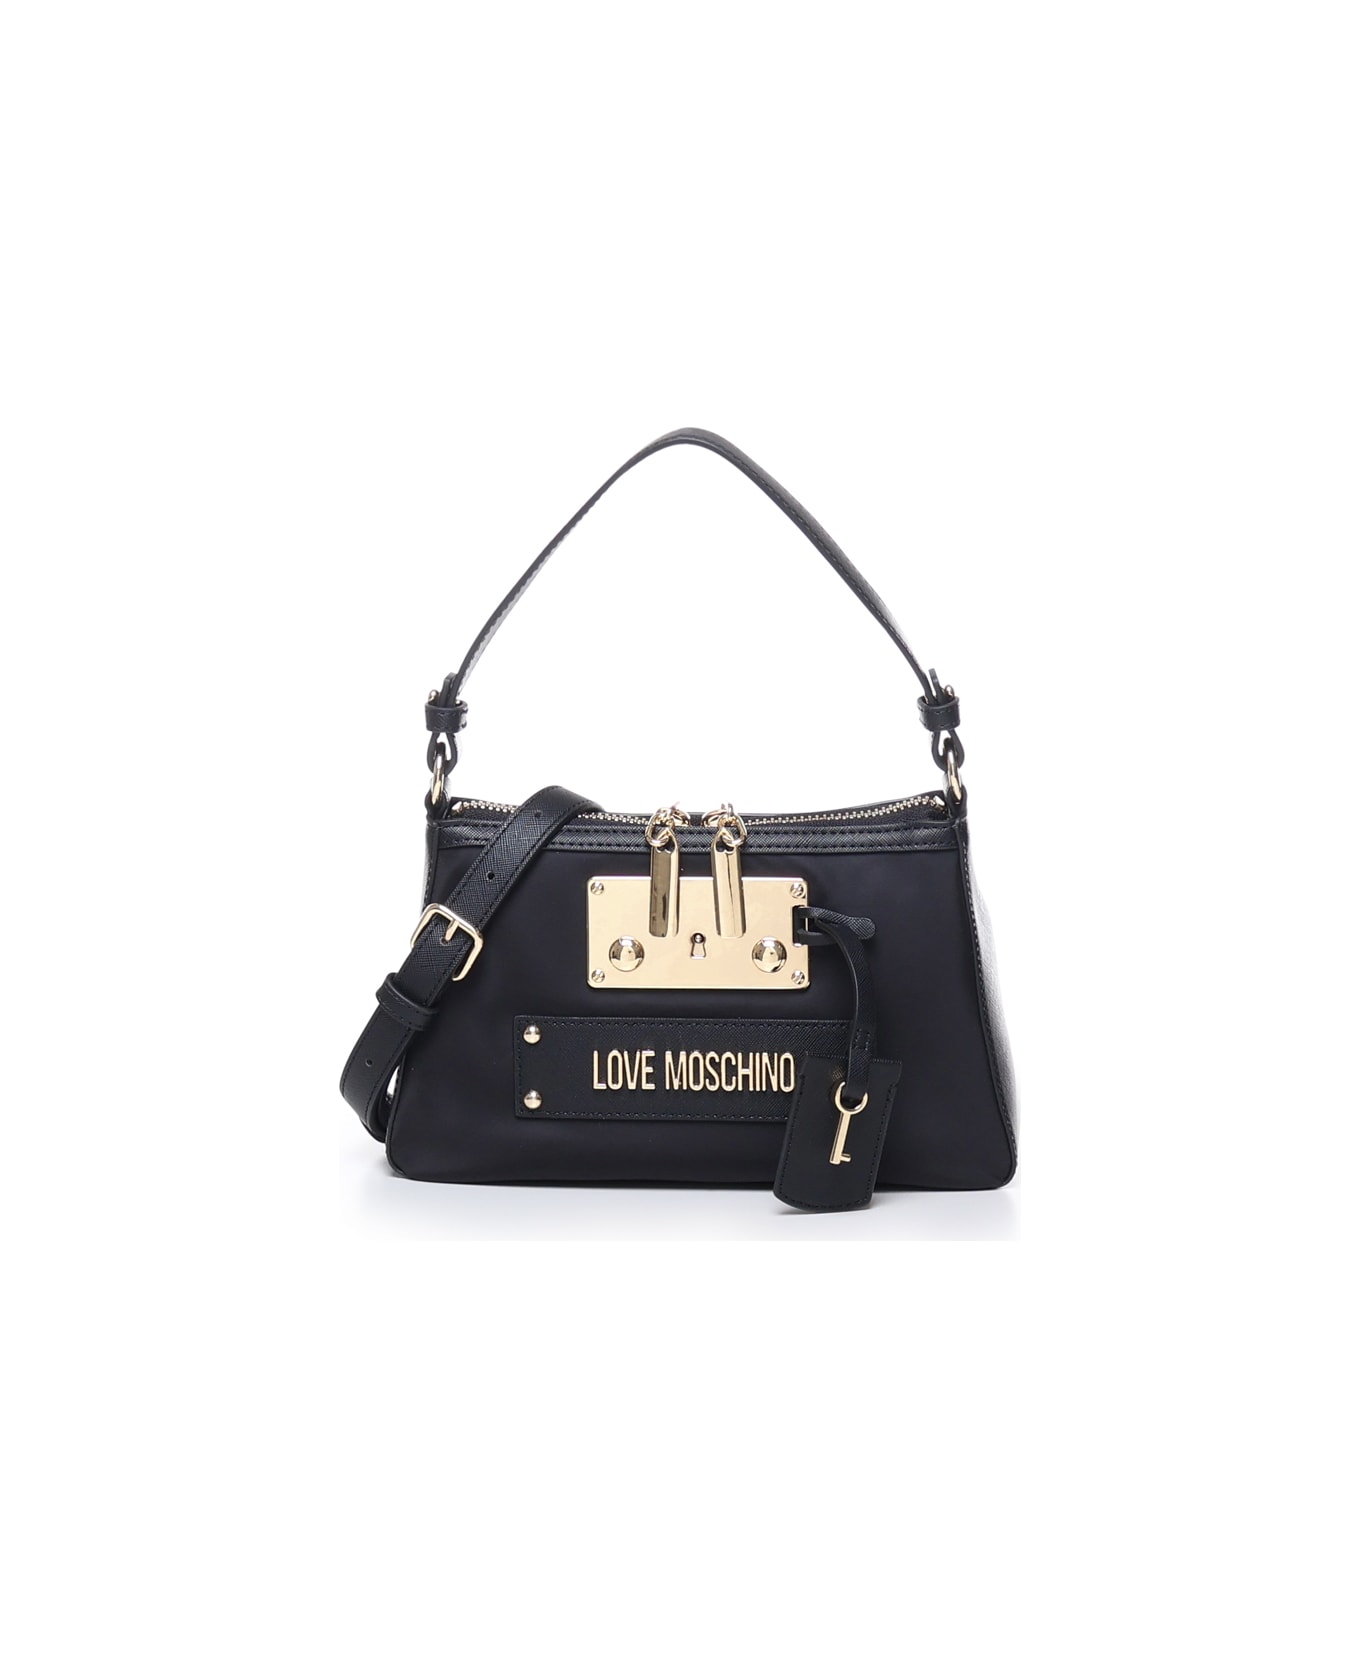 Love Moschino Bag With Handle And Shoulder Strap - Black